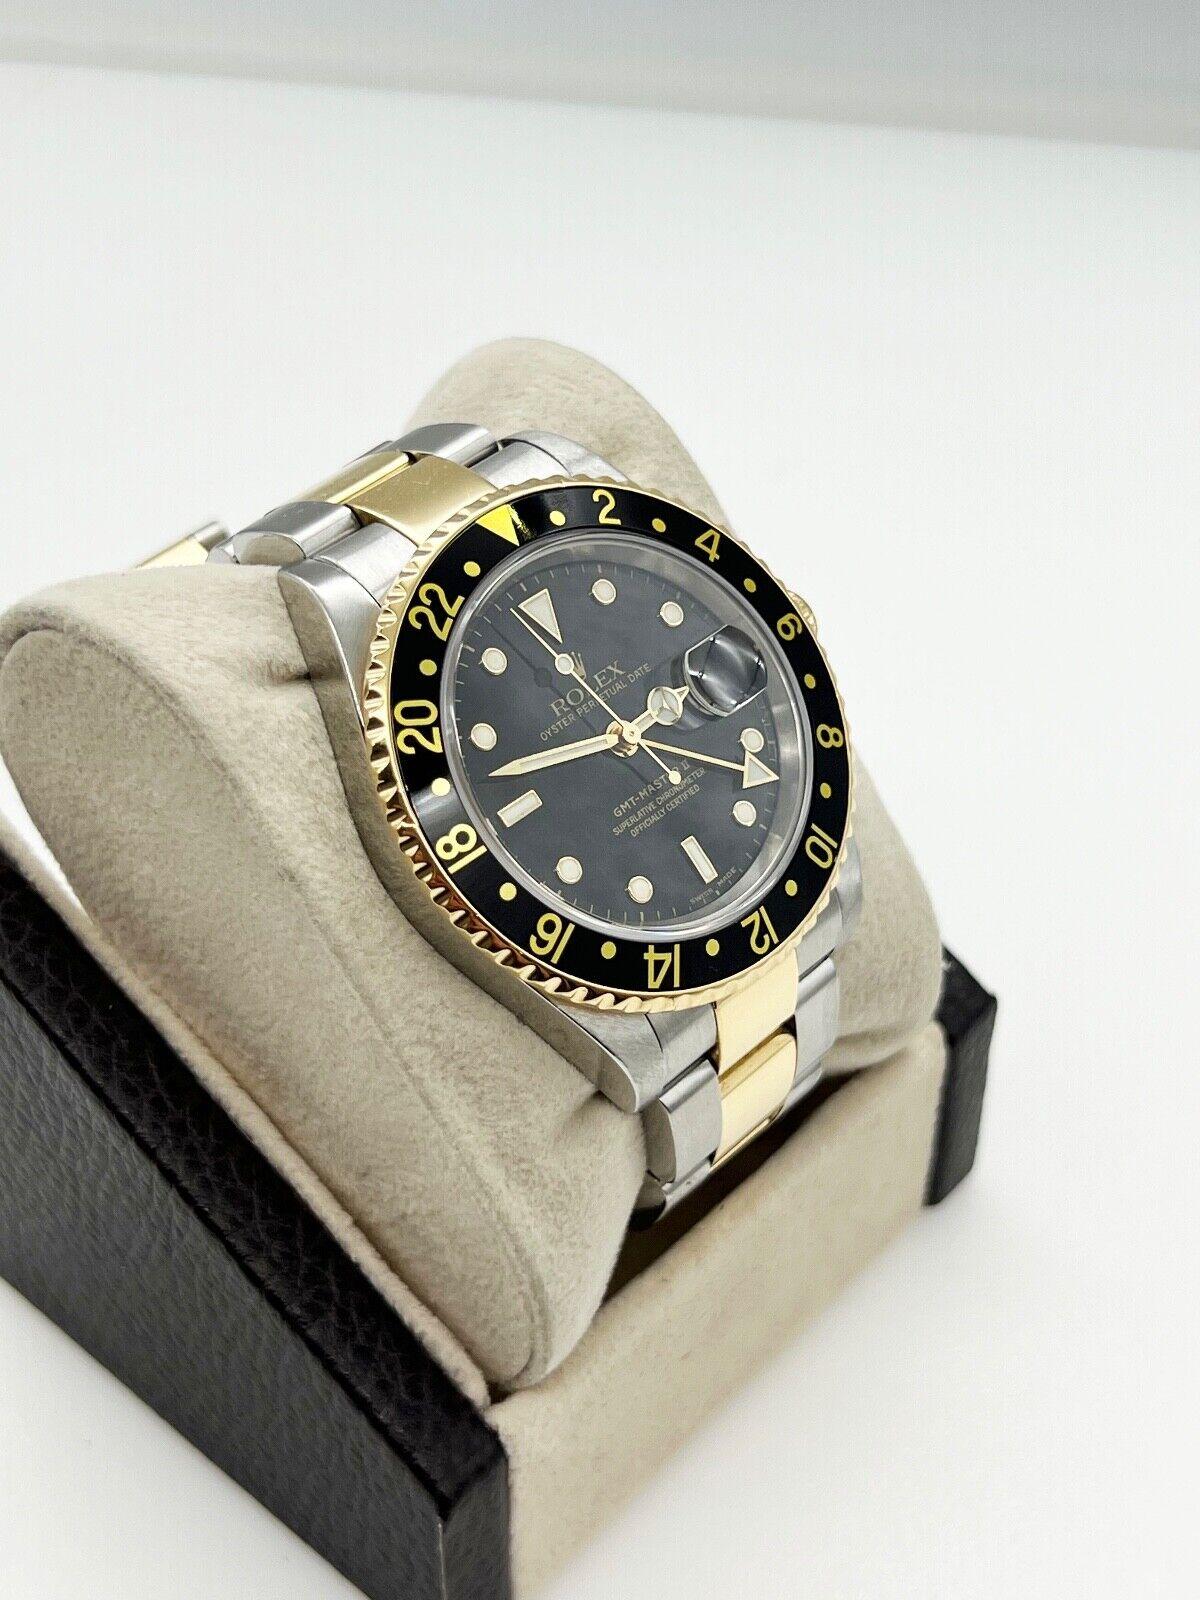 Rolex GMT Master II 16713 Black Dial 18K Yellow Gold Stainless Steel 2003 In Excellent Condition For Sale In San Diego, CA